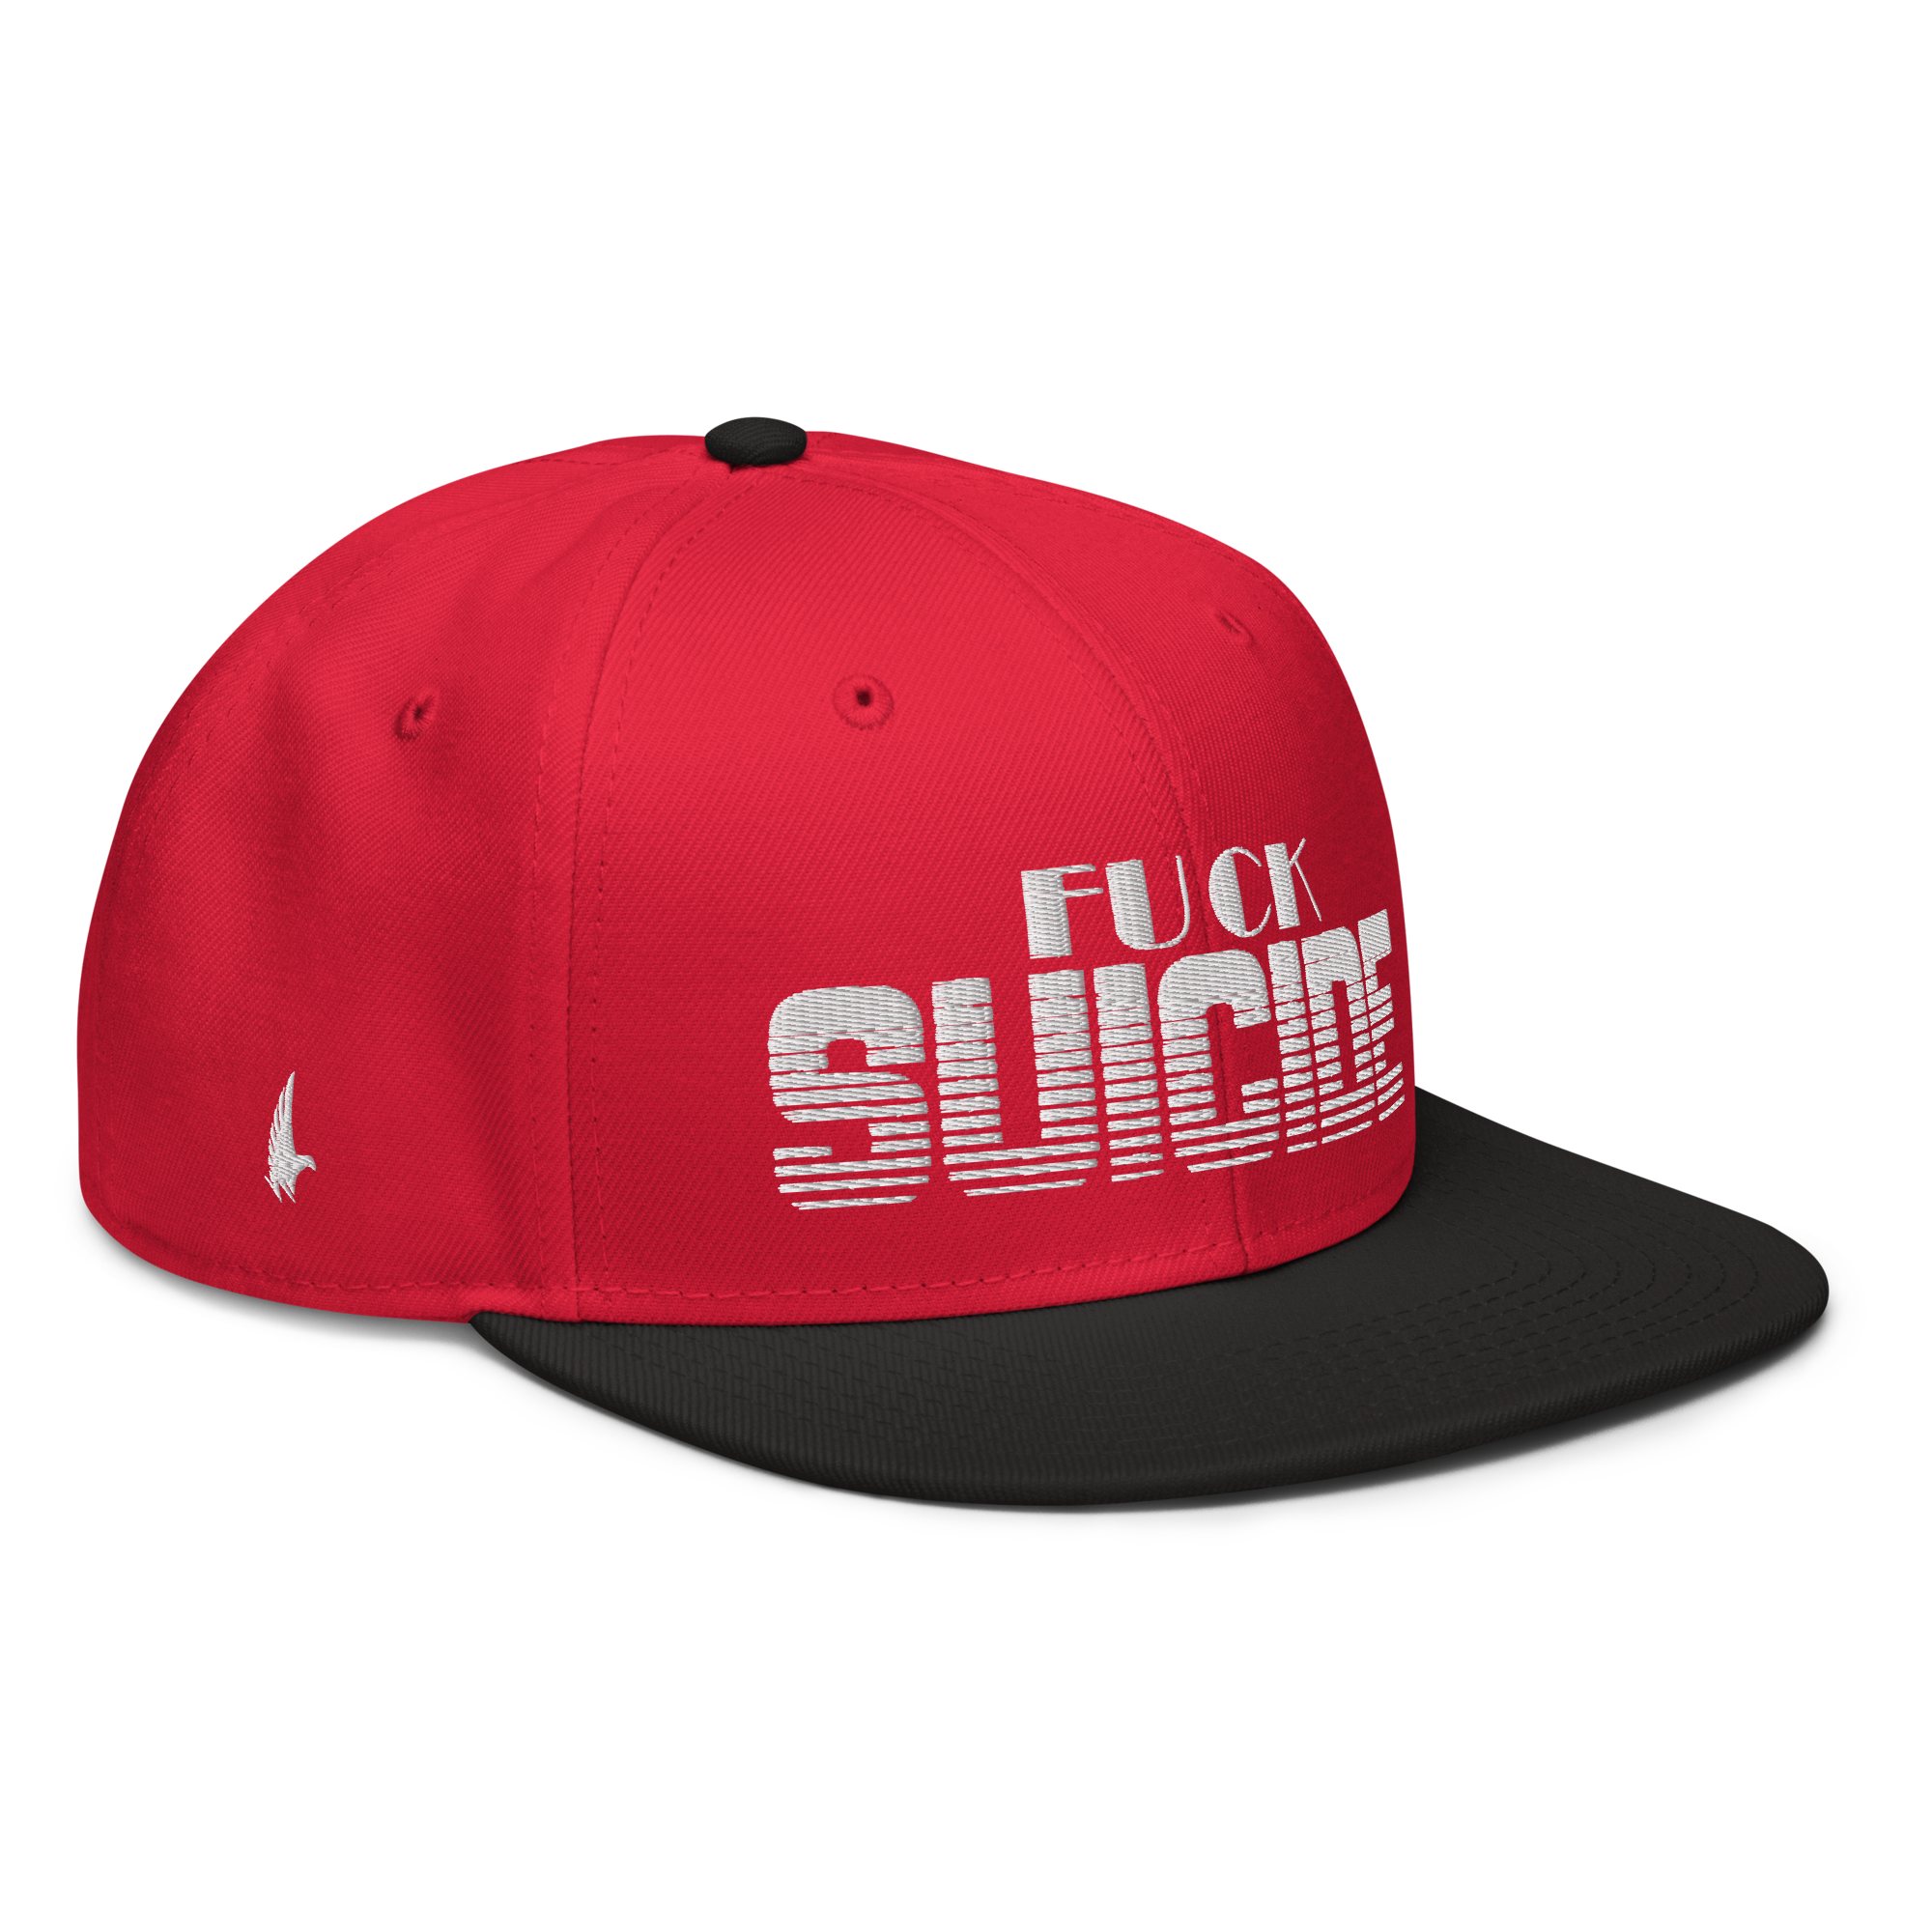 Fk Suicide Snapback Hat - Red / White / Black OS - Loyalty Vibes